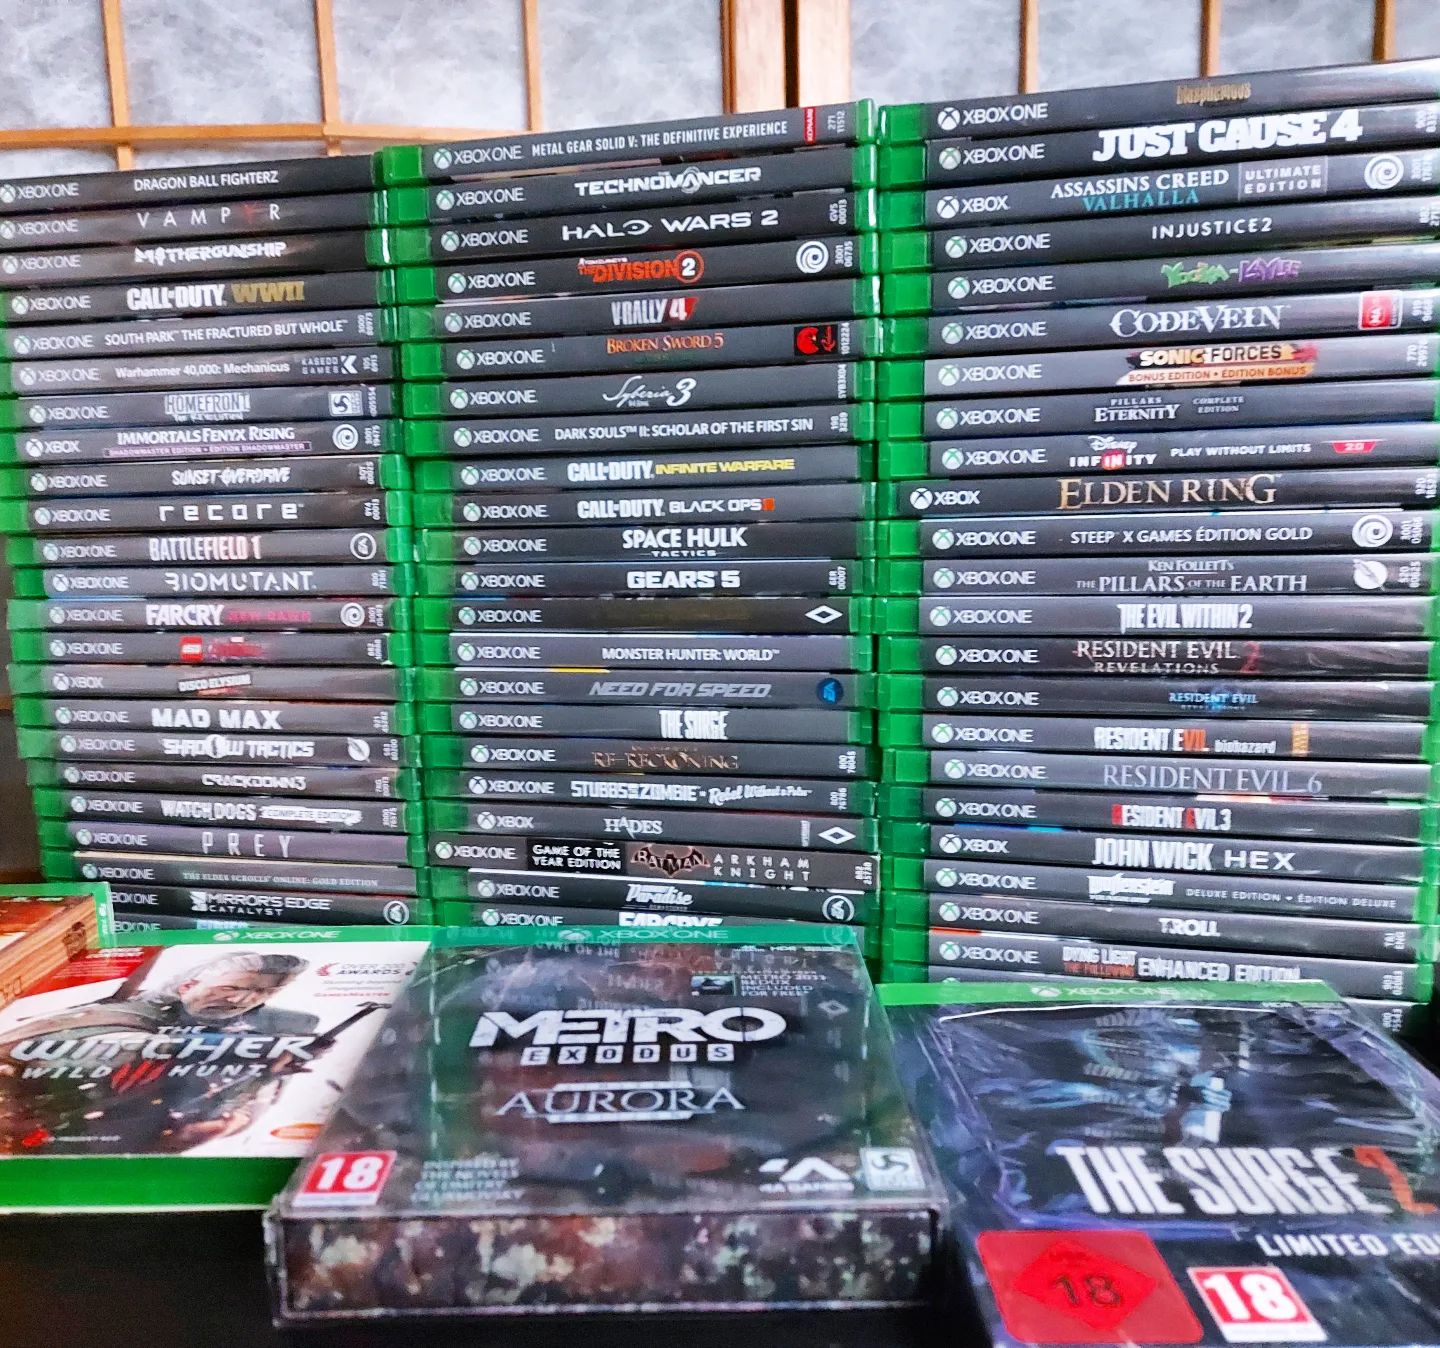 My backlog for the Xbox One is ridiculous... And this isn't even all of it. 😅

Still, not much shame here. I always only buy games I want to play. And I want to have them available to me, like a library. But yeah, it's kinda much 😄

#retrogamepapa #gaming #gamecollector #gamecollecting #backlog #xboxone #xbox #xboxgames #gamesbacklog #gamecollection #xboxseriess #xboxseriesx